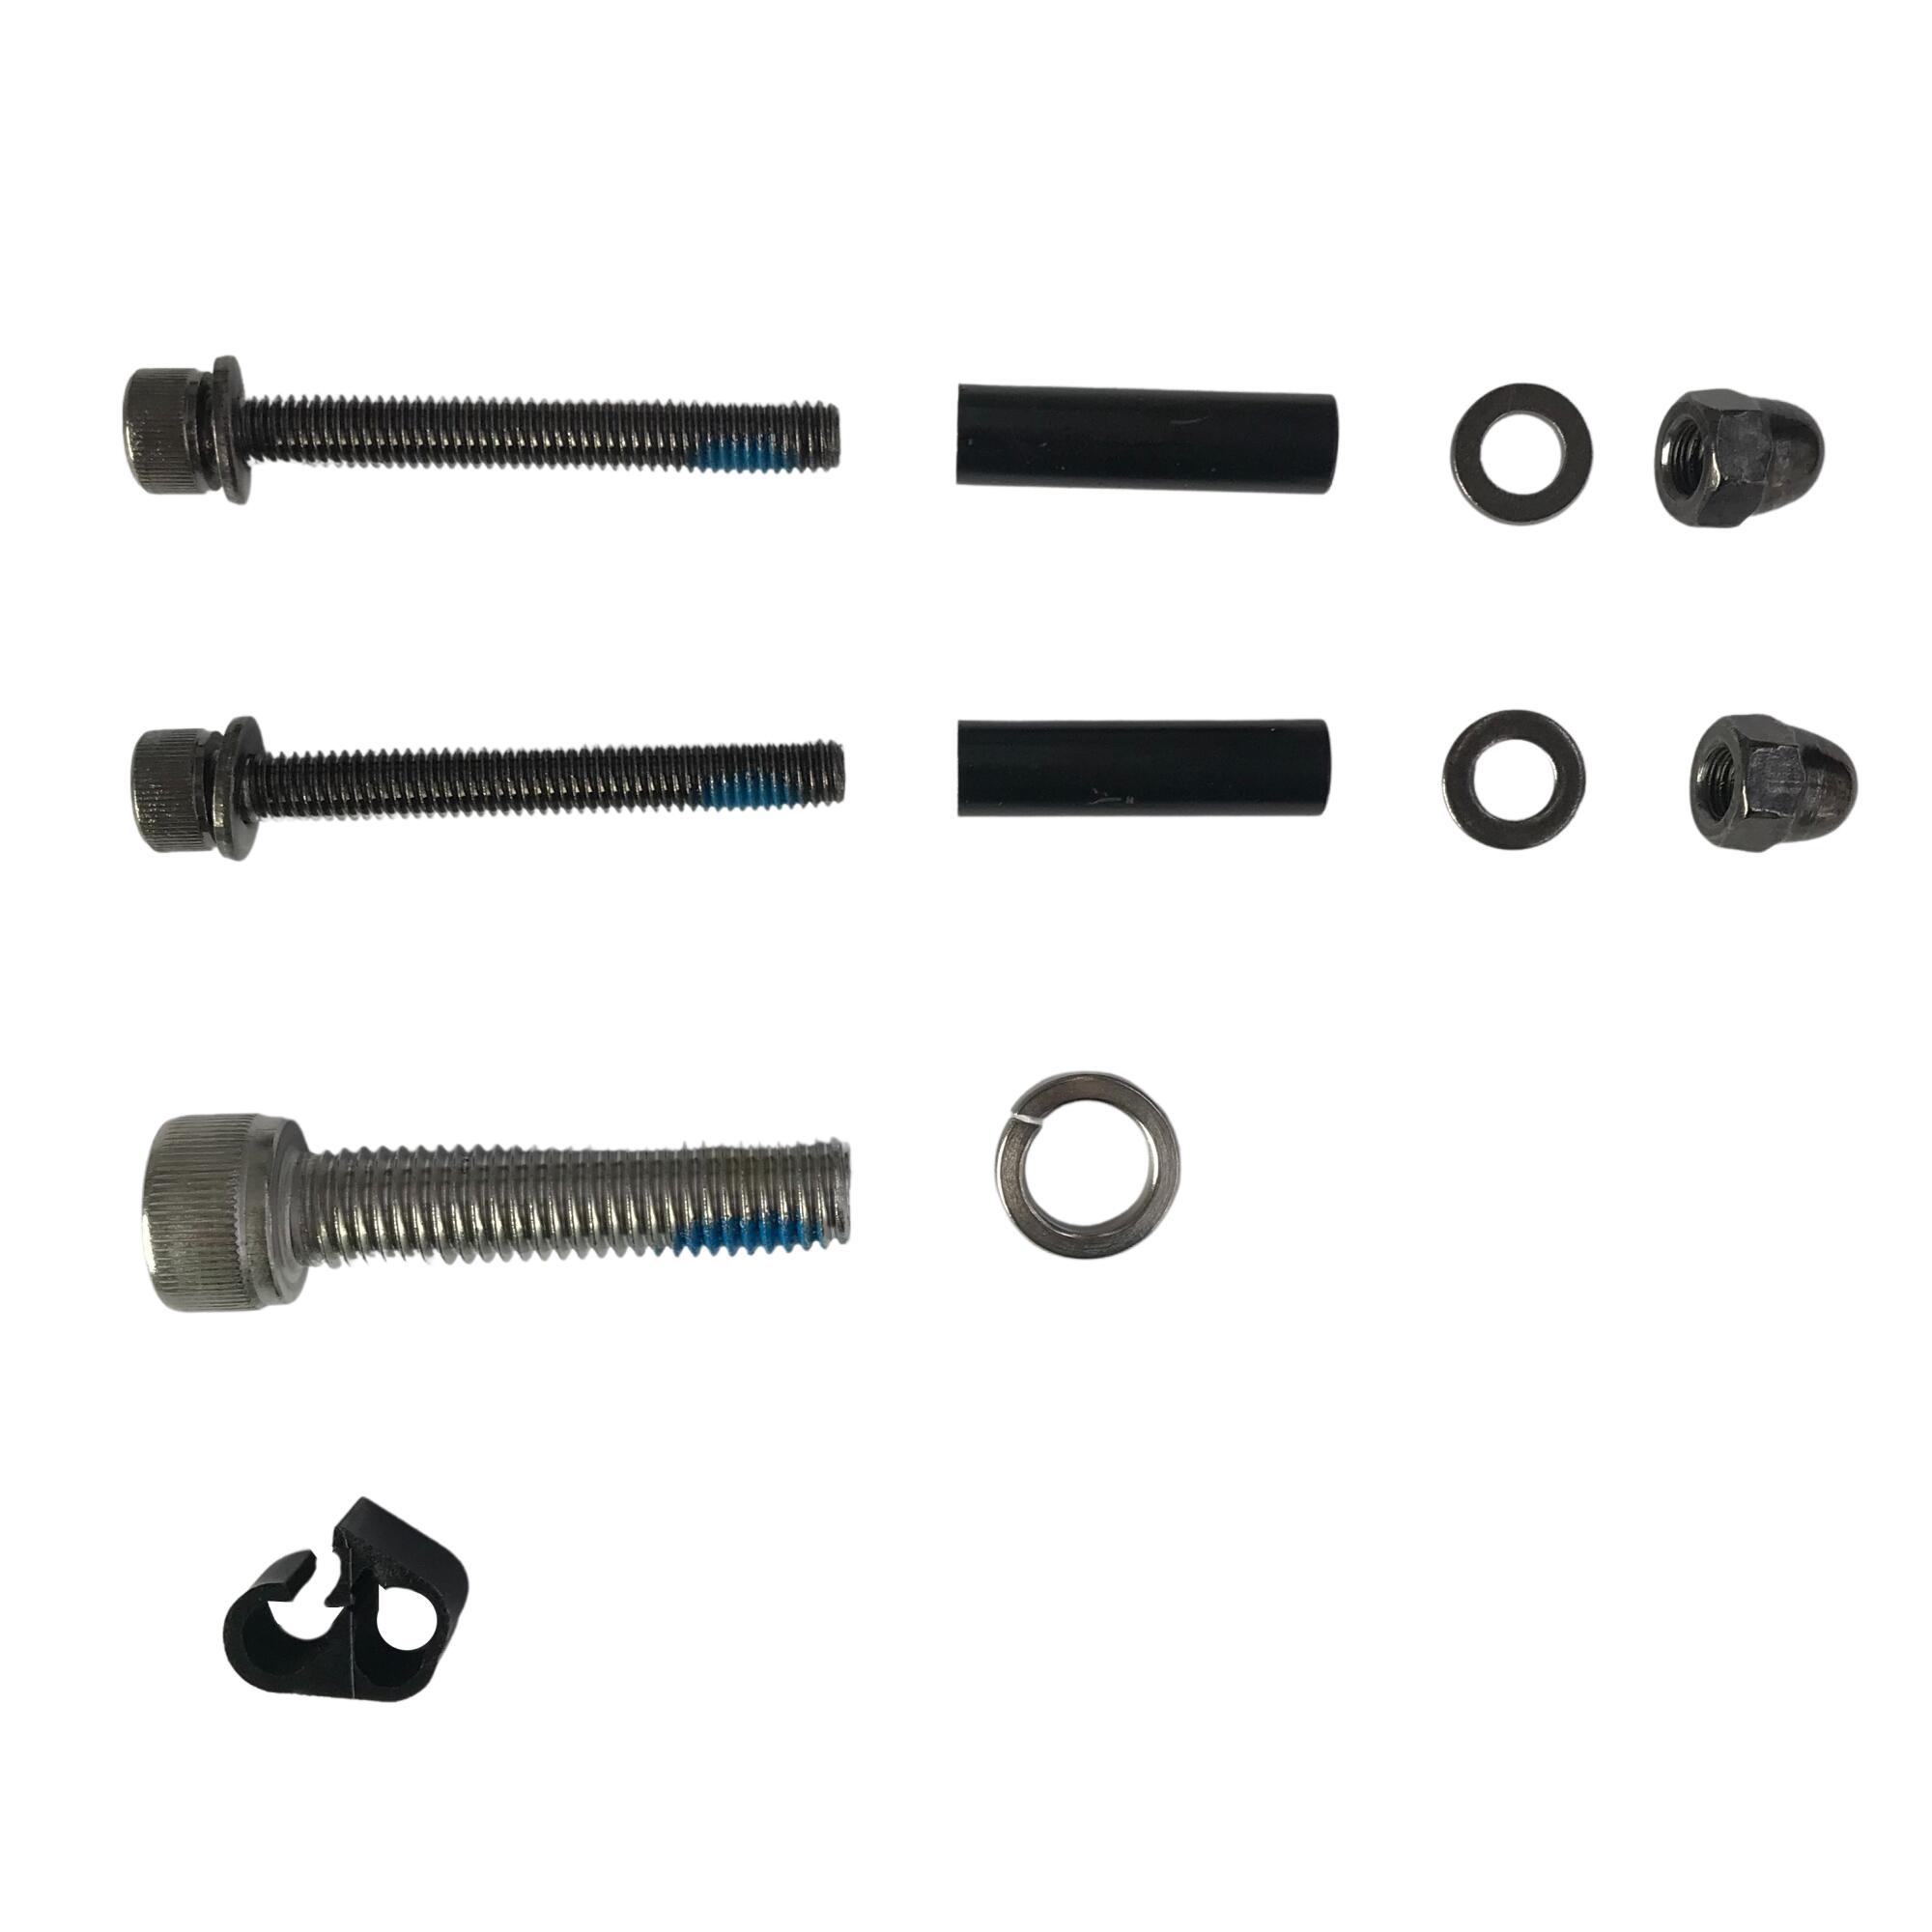 ELOPS Screws Kit for the Front Basket for the R500 Electric Cargo Bike